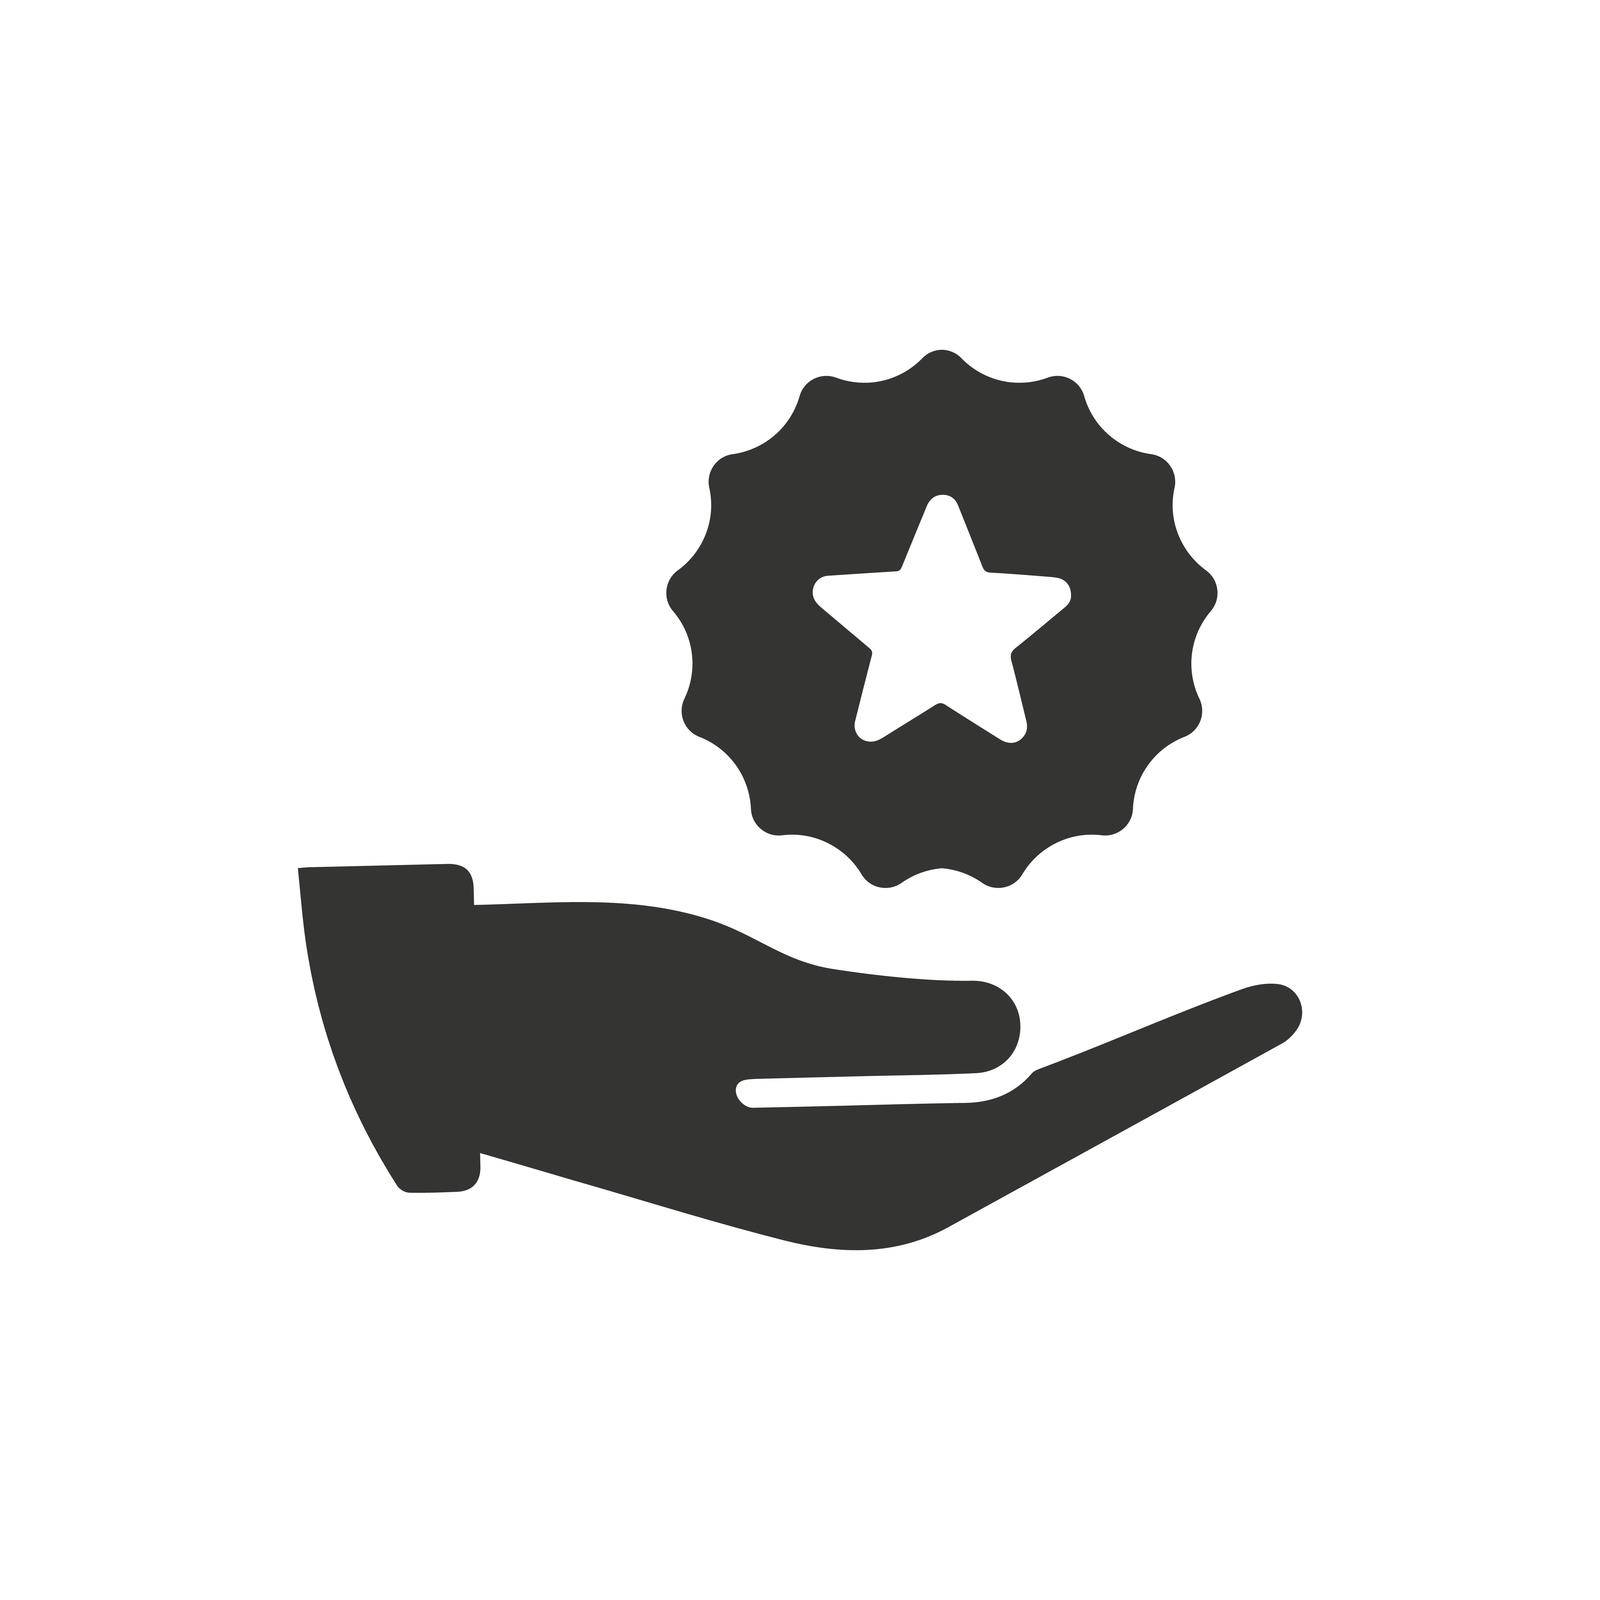 Quality Ribbon icon. Vector EPS file.